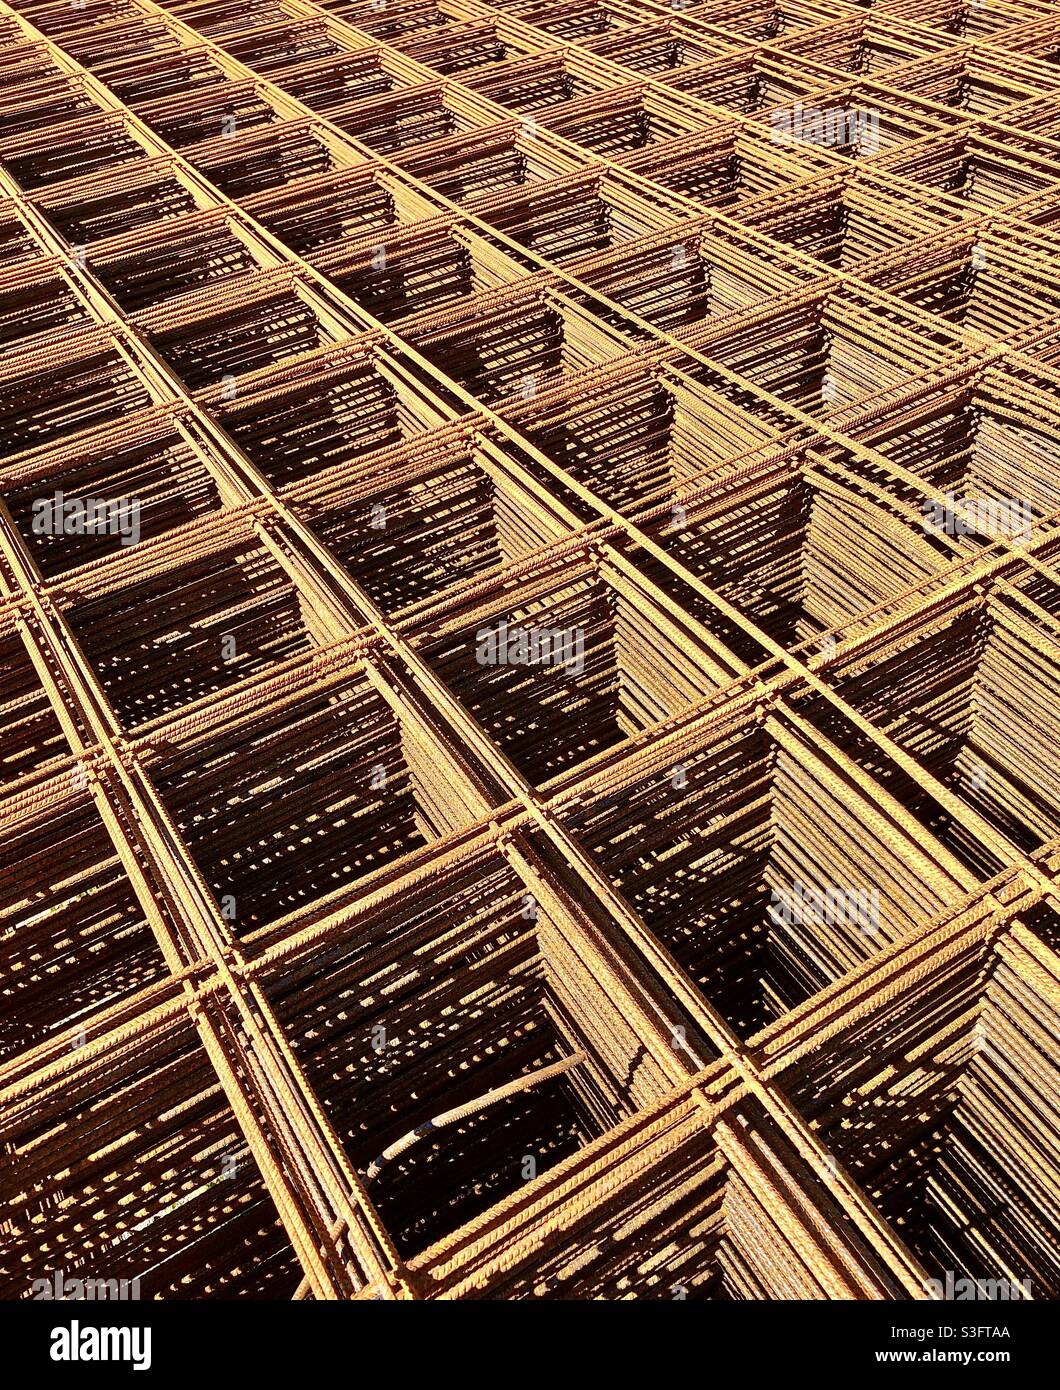 Stack of rusty steel reinforcing rods. Stock Photo